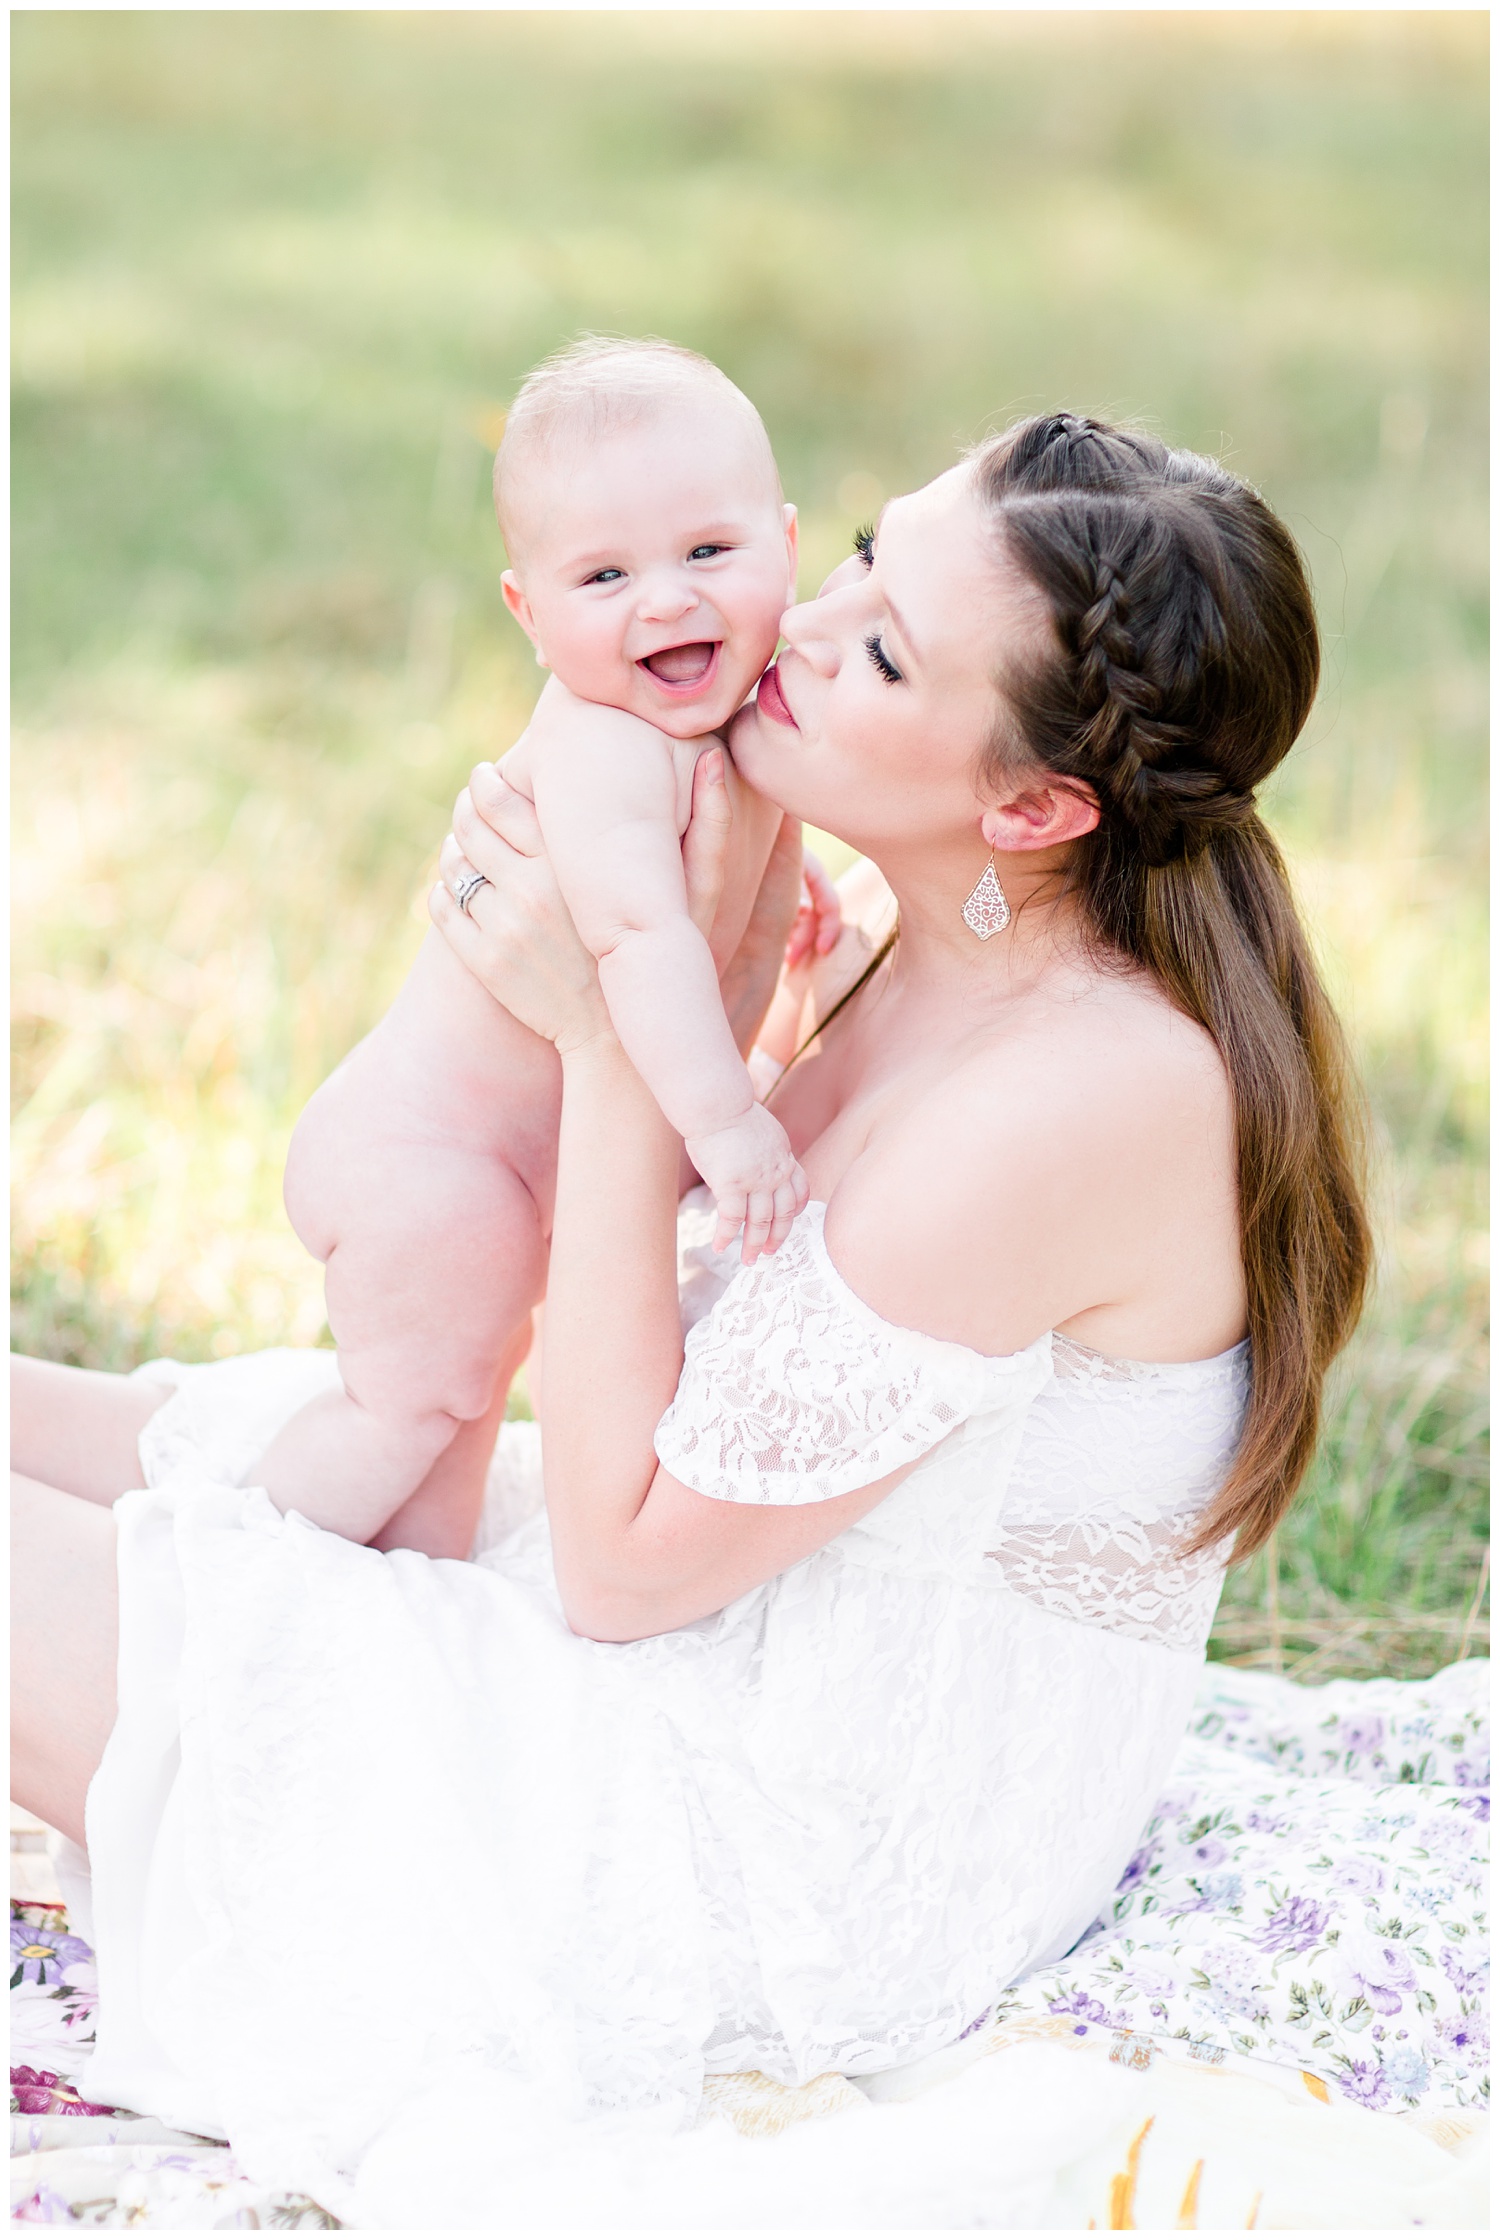 Beautiful mama wearing a white lacy dress sits in a glowy, grassy field snuggling her smiling baby boy | CB Studio